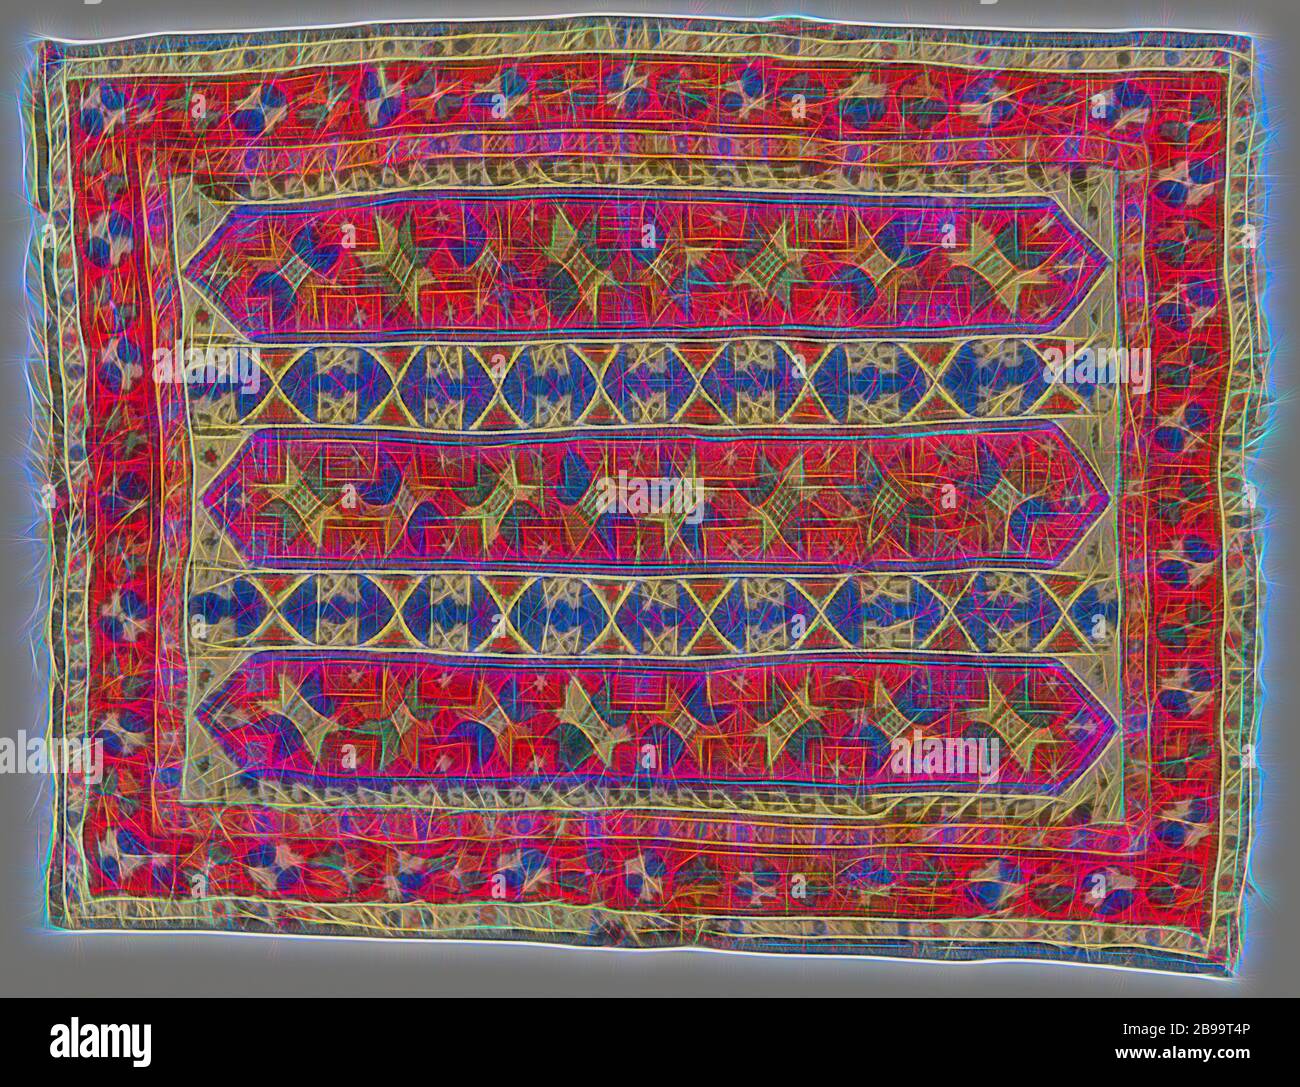 Oriental carpet, striped rug. The white background of the midfield is  almost completely filled with three tracks, ending on both sides in points.  In between there is always a chain of double